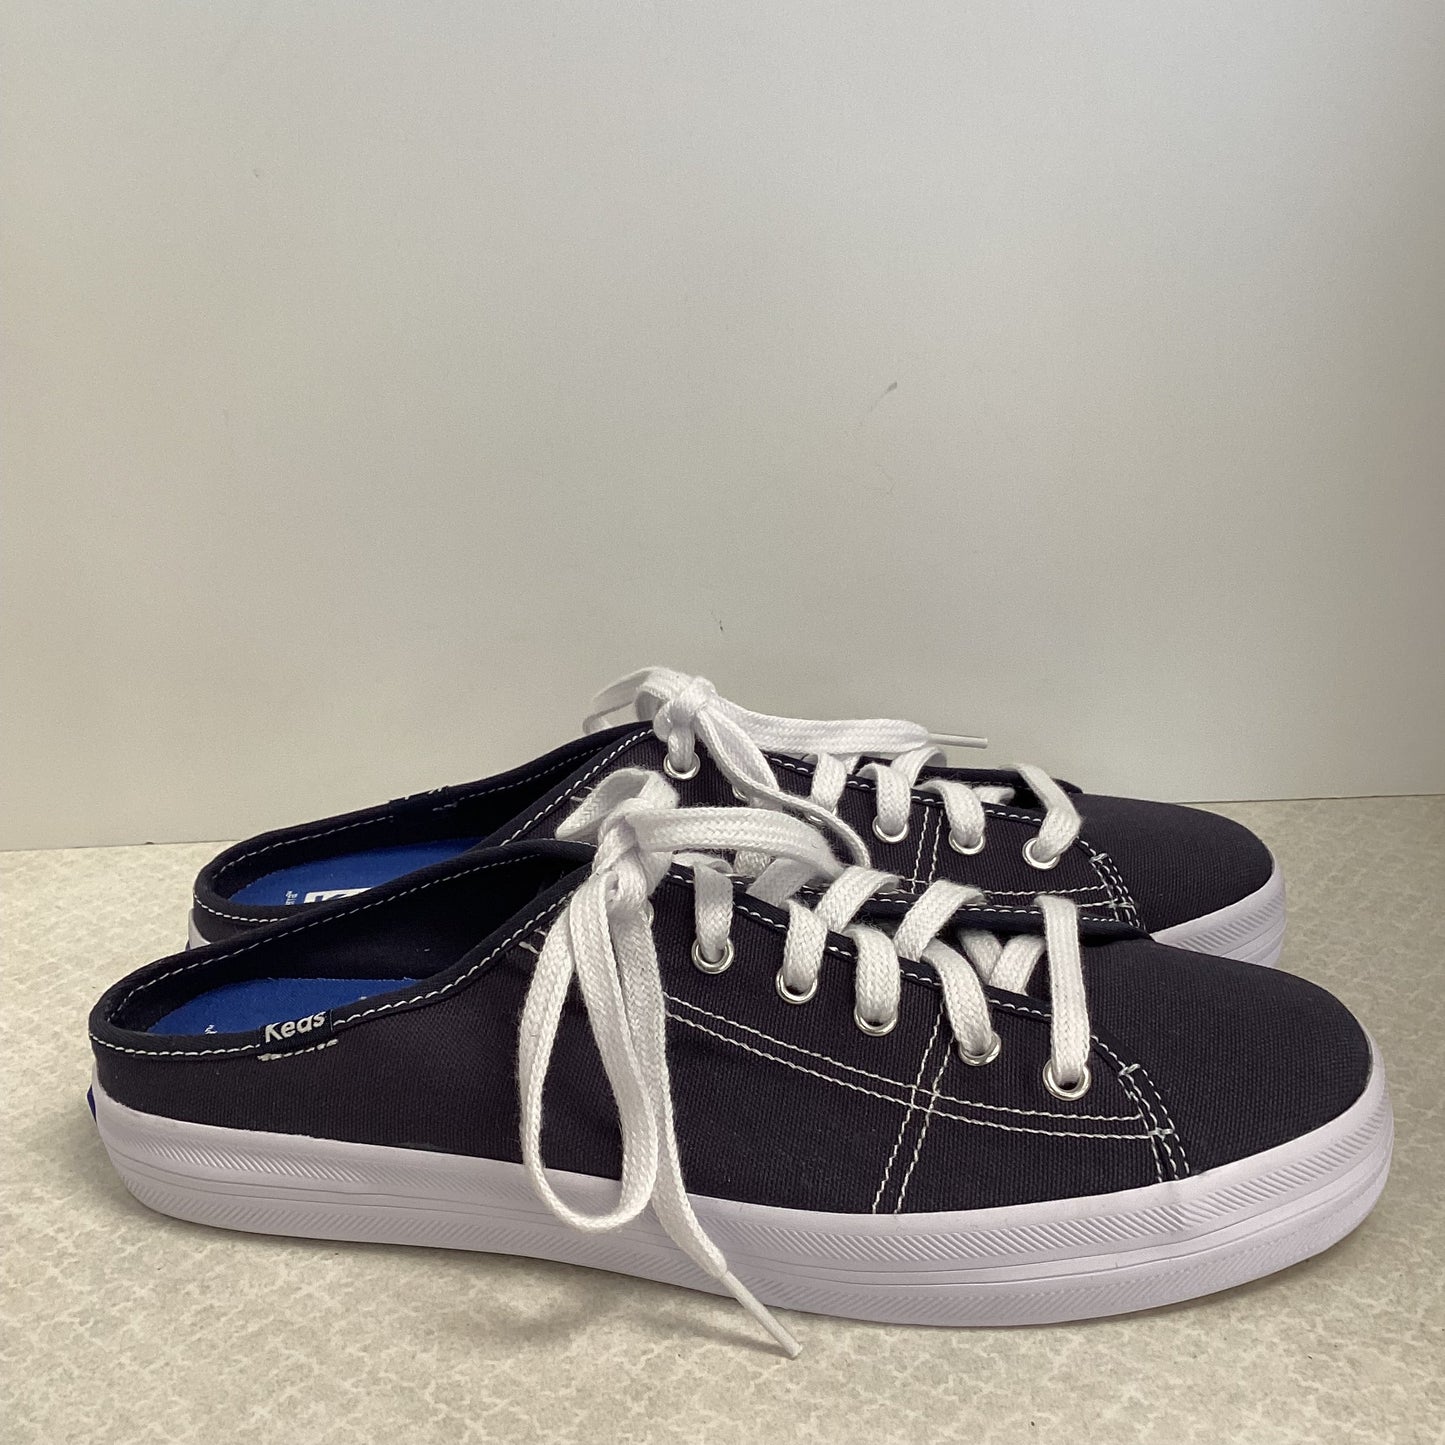 Blue Shoes Sneakers Keds, Size 9.5